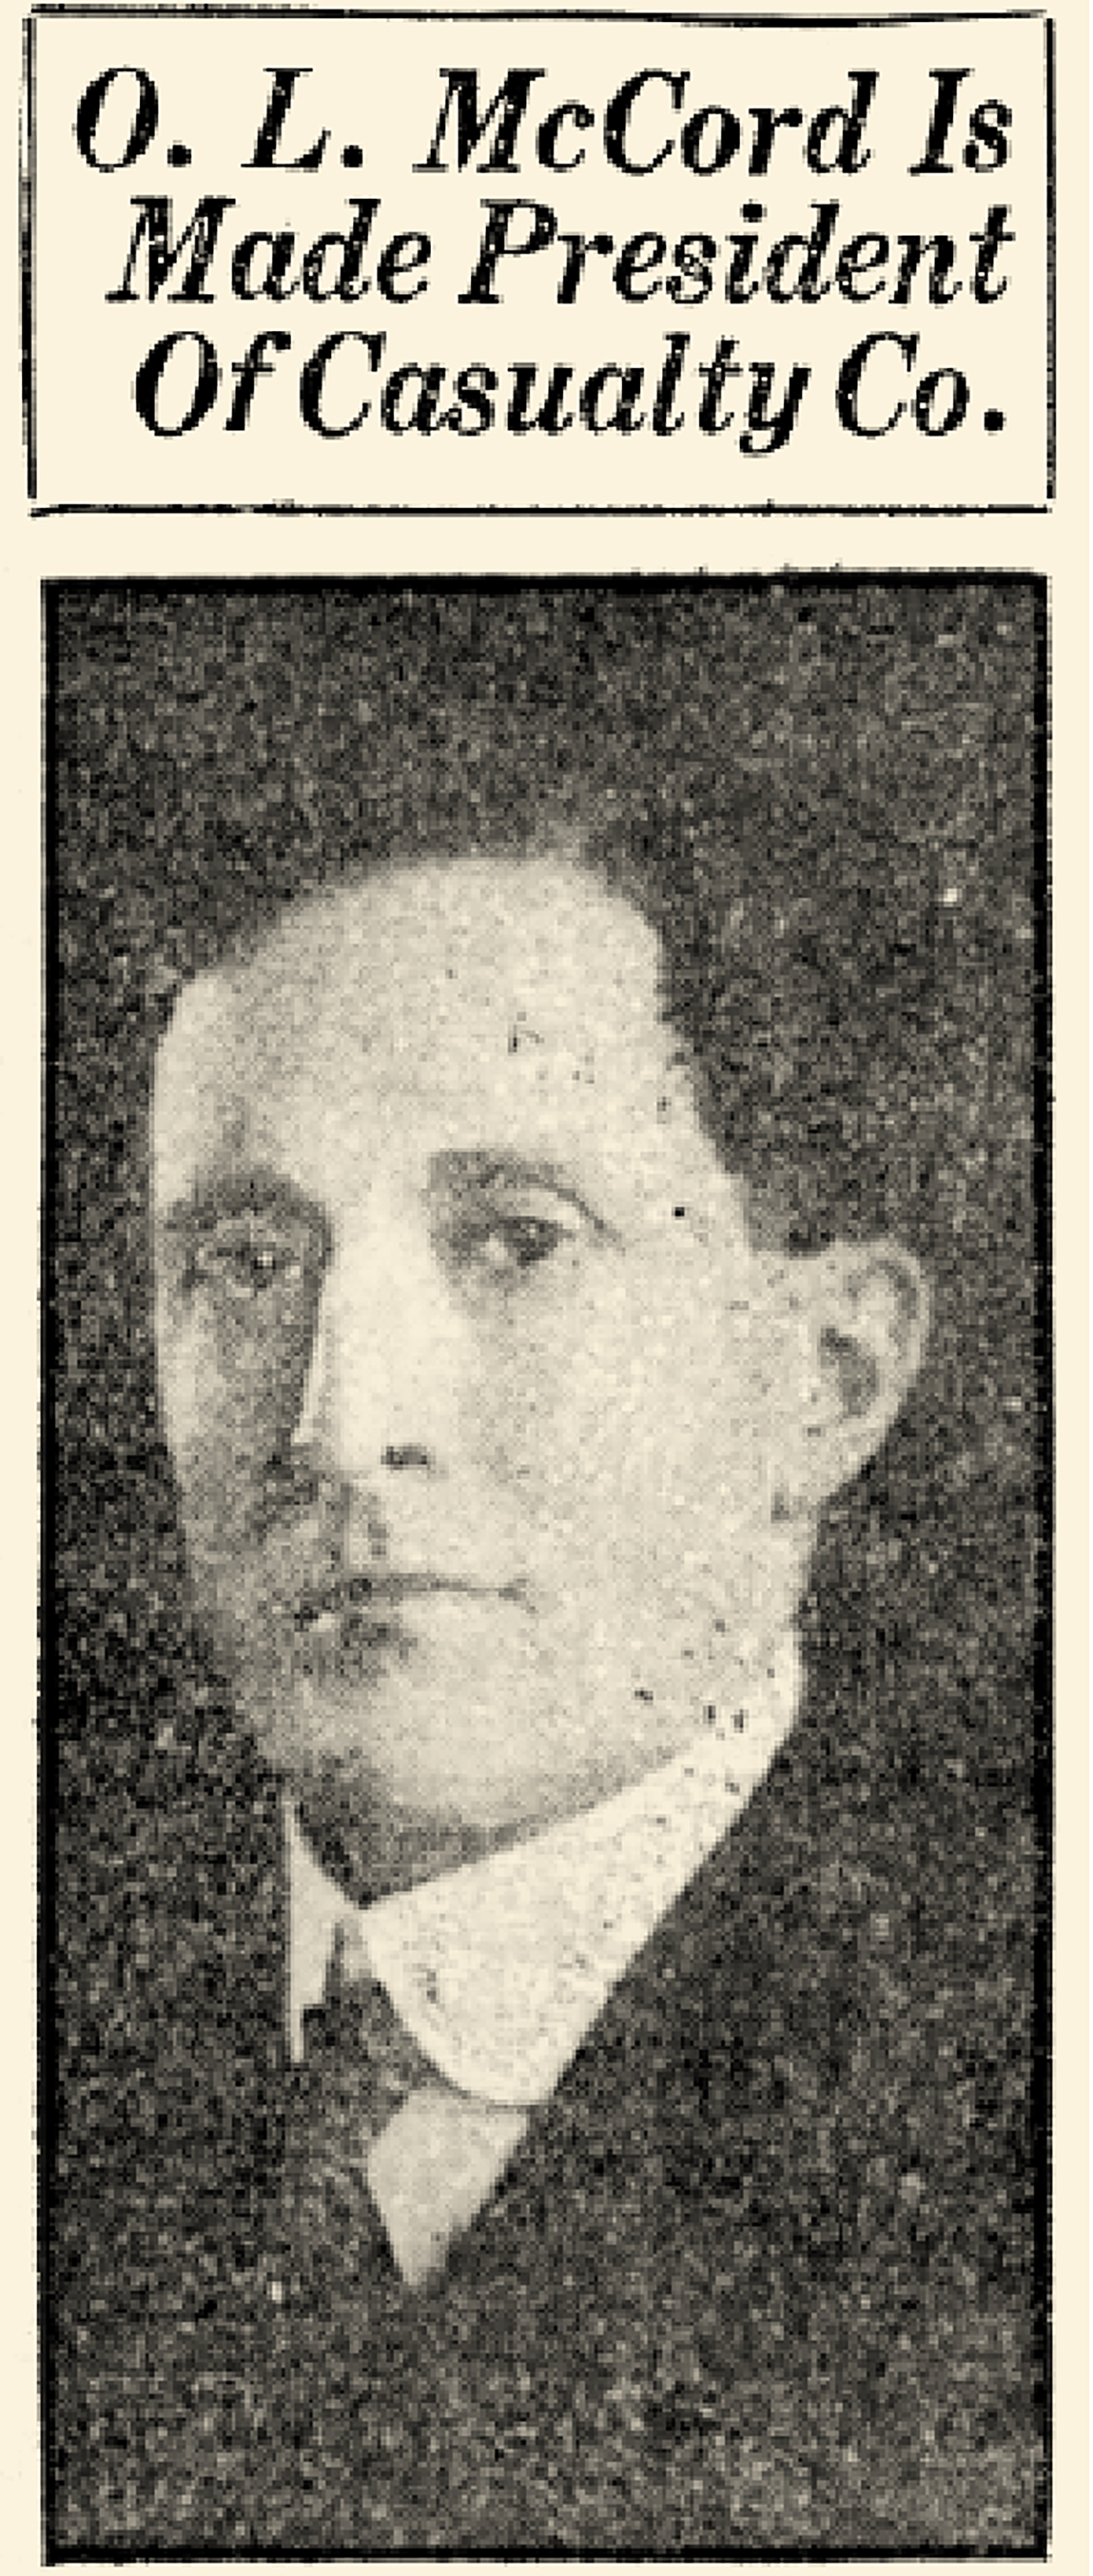 Newspaper clipping from the announcement of O.L. McCord as President of Illinois Mutual Casualty Company.